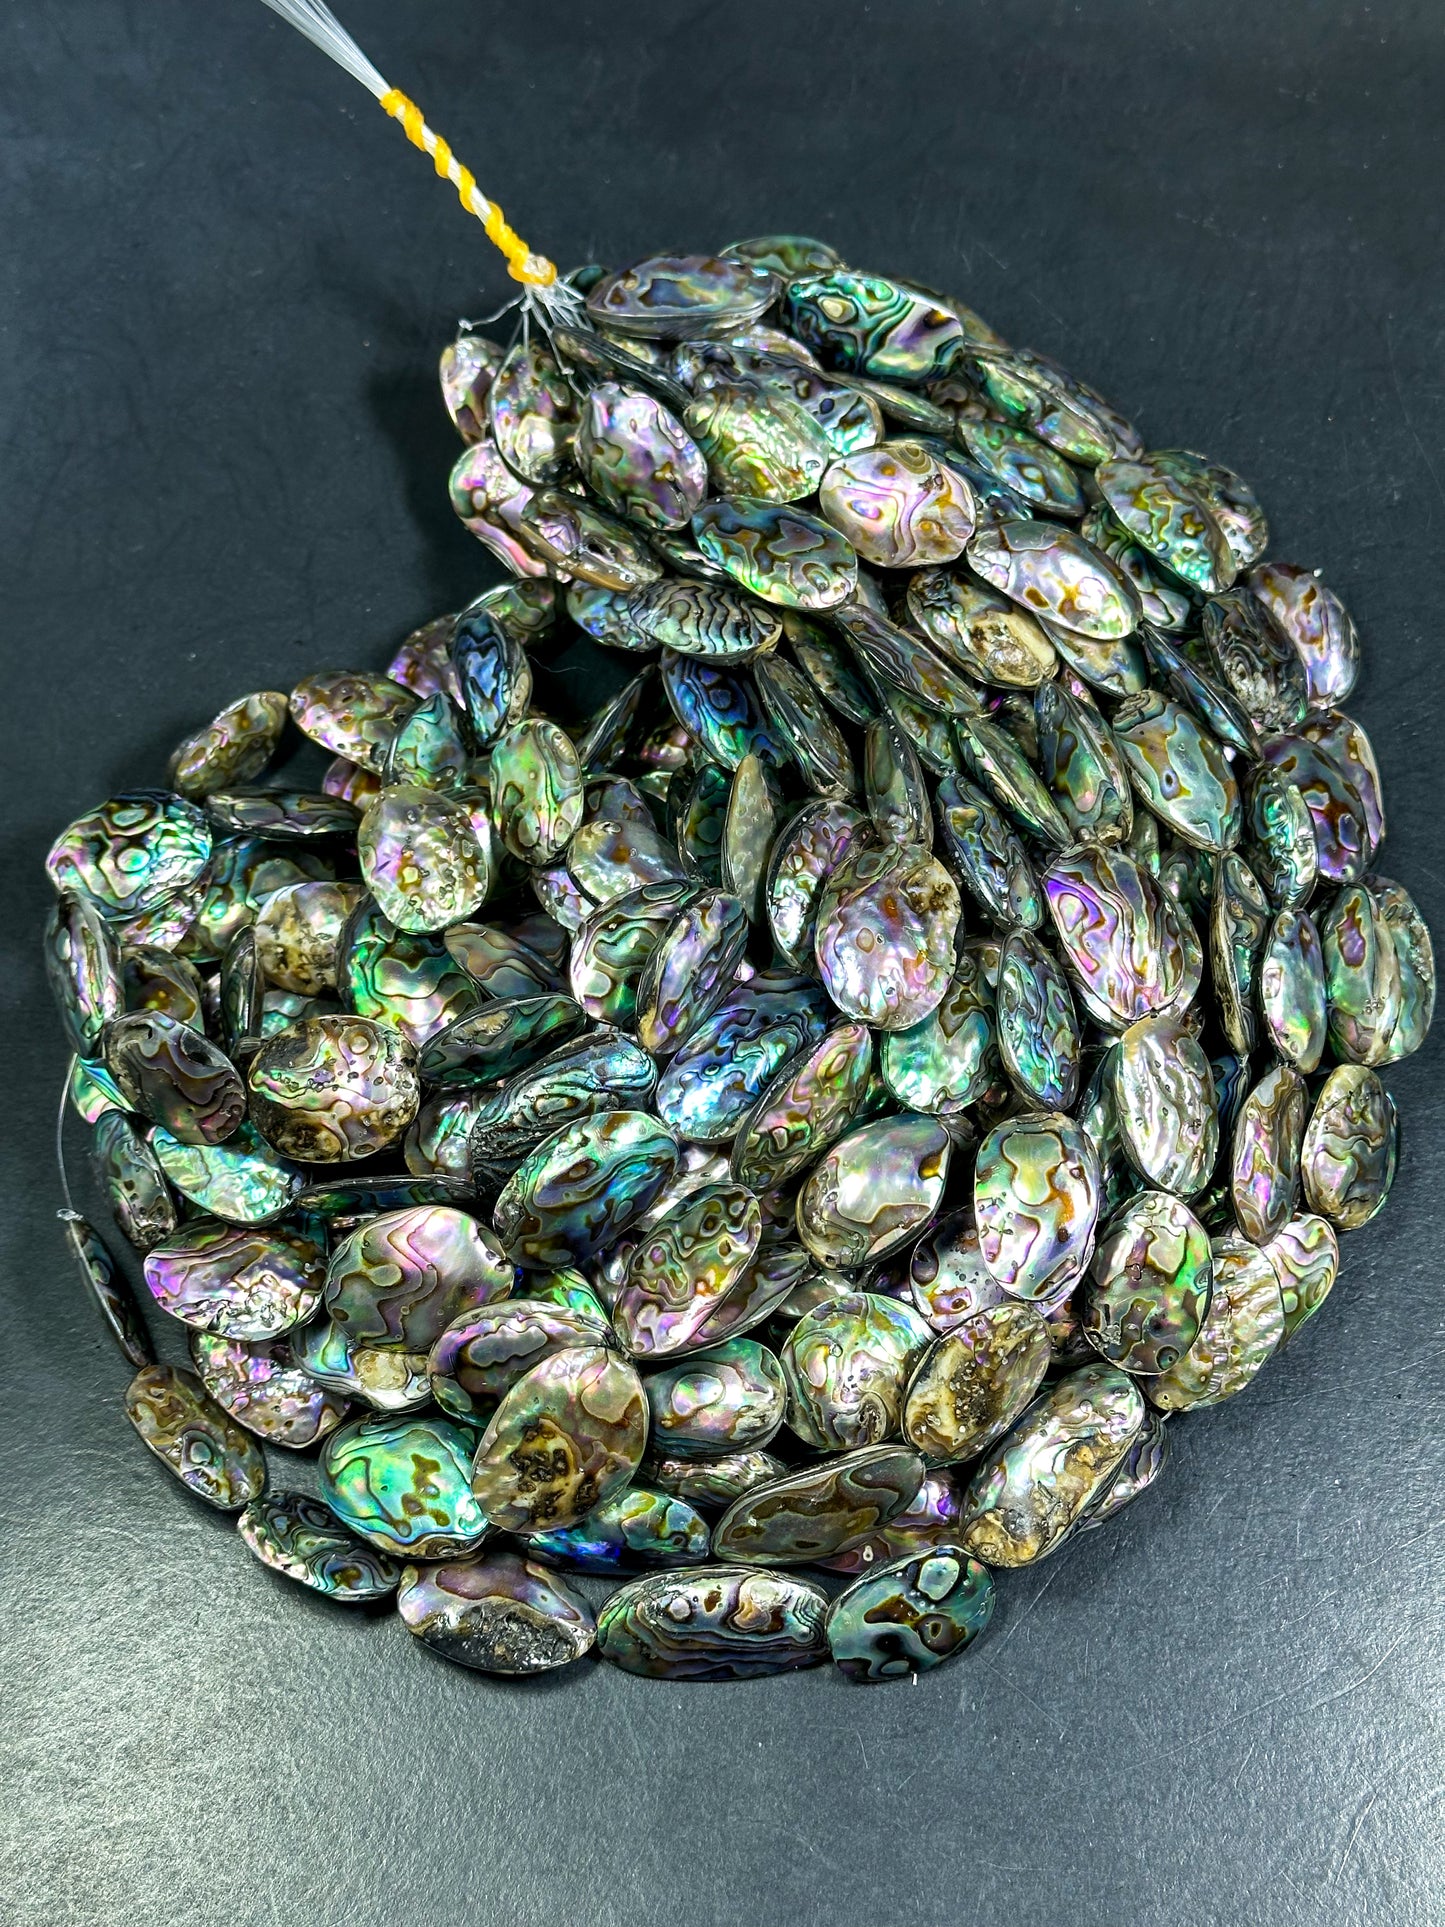 AAA Natural Abalone Shell Bead 26x20mm Oval Shape, Gorgeous Natural Rainbow Peacock Color Abalone Shell Excellent Quality Full Strand 15.5"